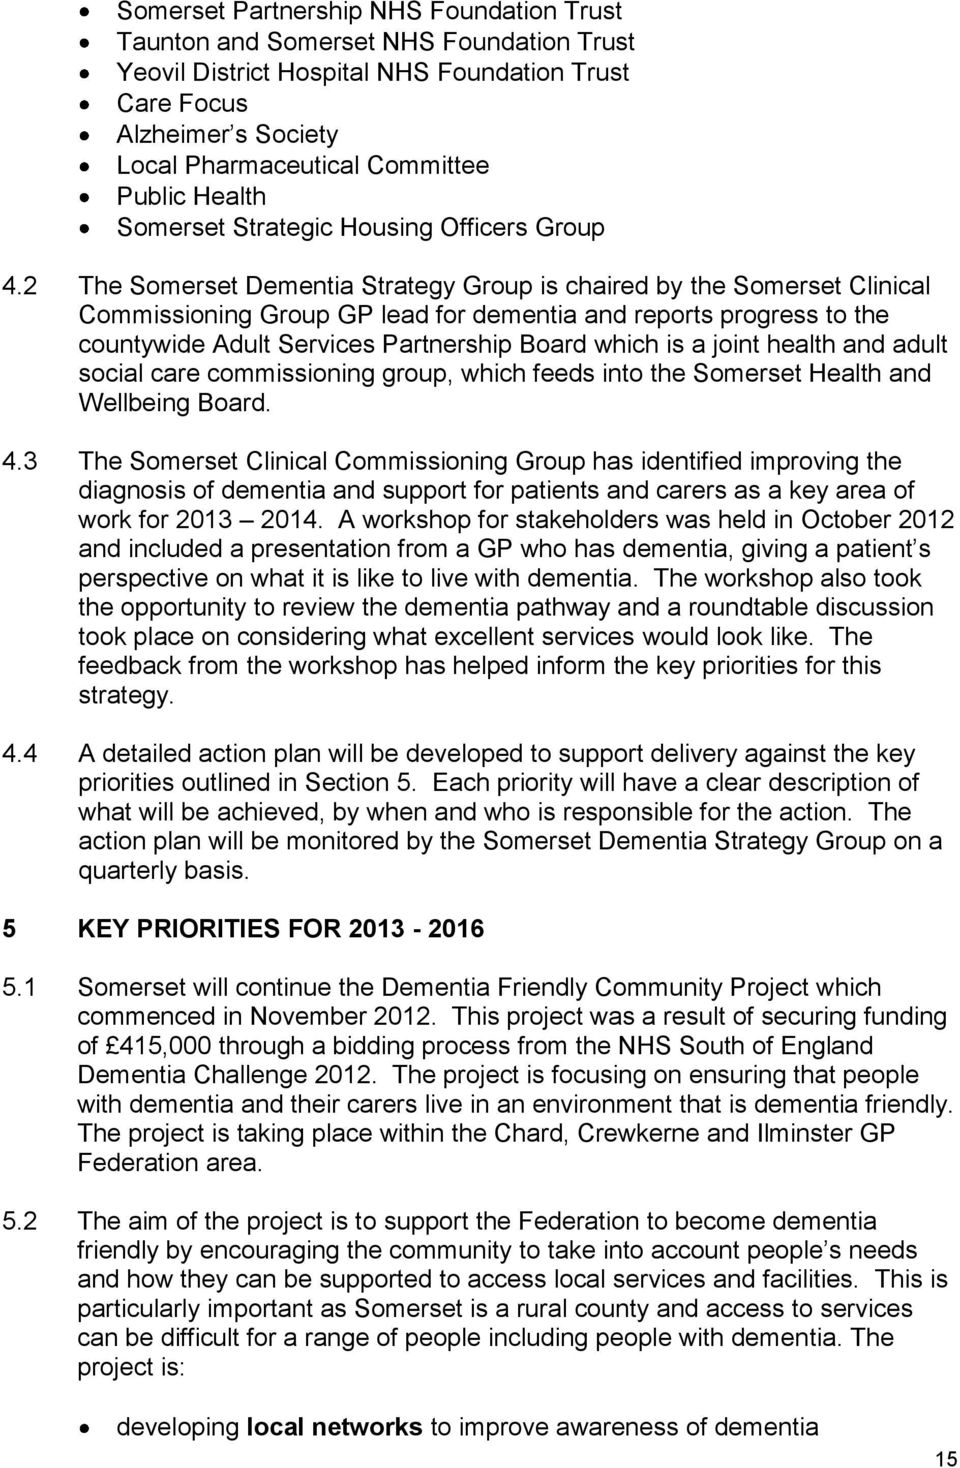 2 The Somerset Dementia Strategy Group is chaired by the Somerset Clinical Commissioning Group GP lead for dementia and reports progress to the countywide Adult Services Partnership Board which is a